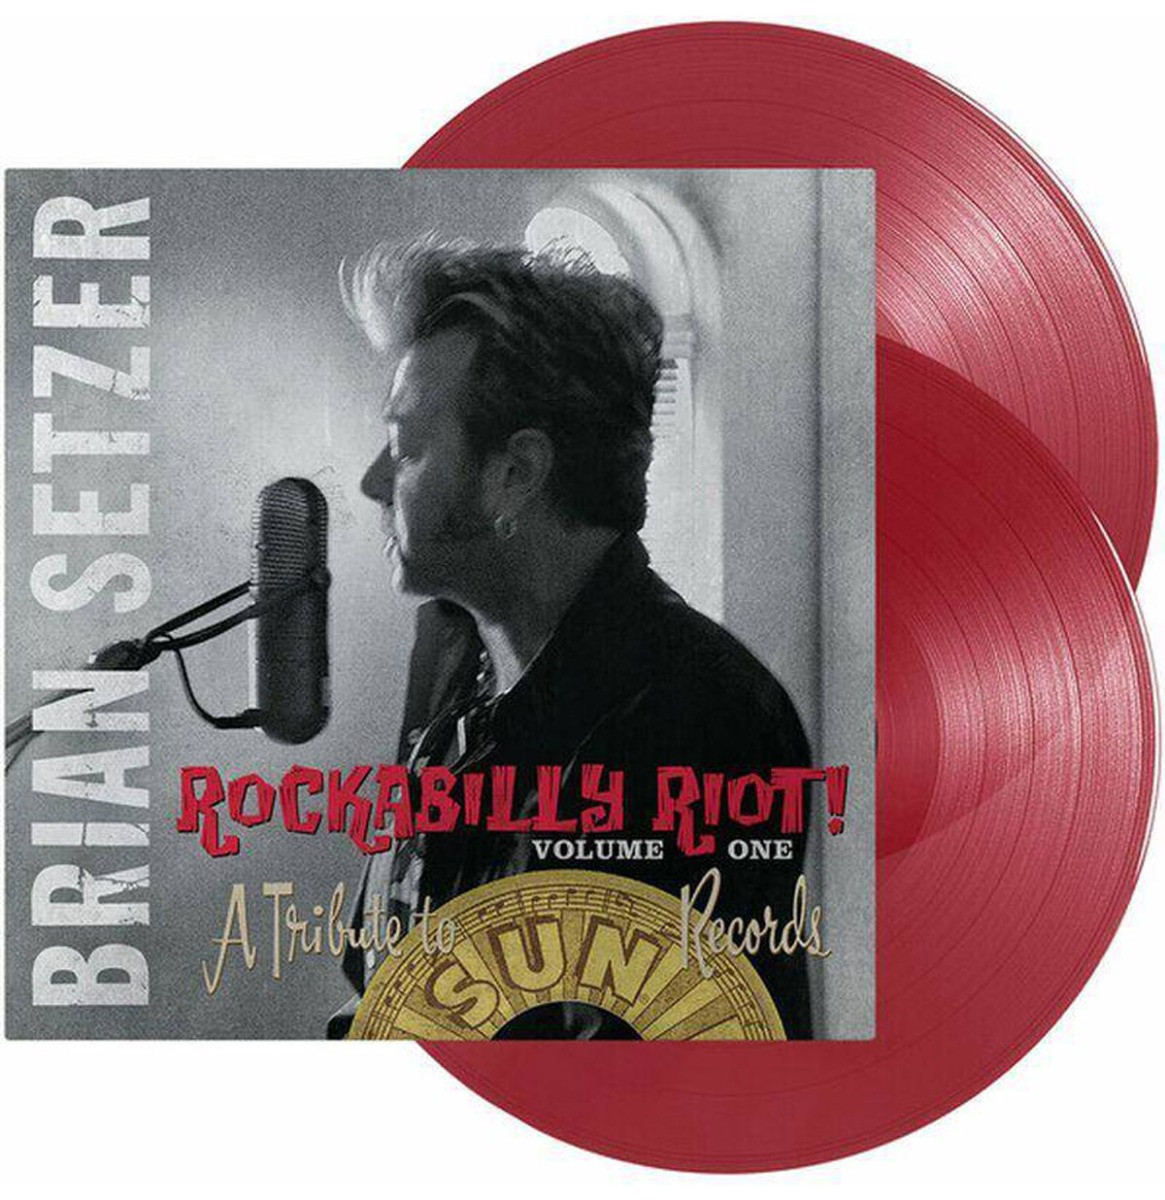 Brian Setzer Rockabilly Riot! Volume One: A Tribute To Sun Records Rood 2 LP